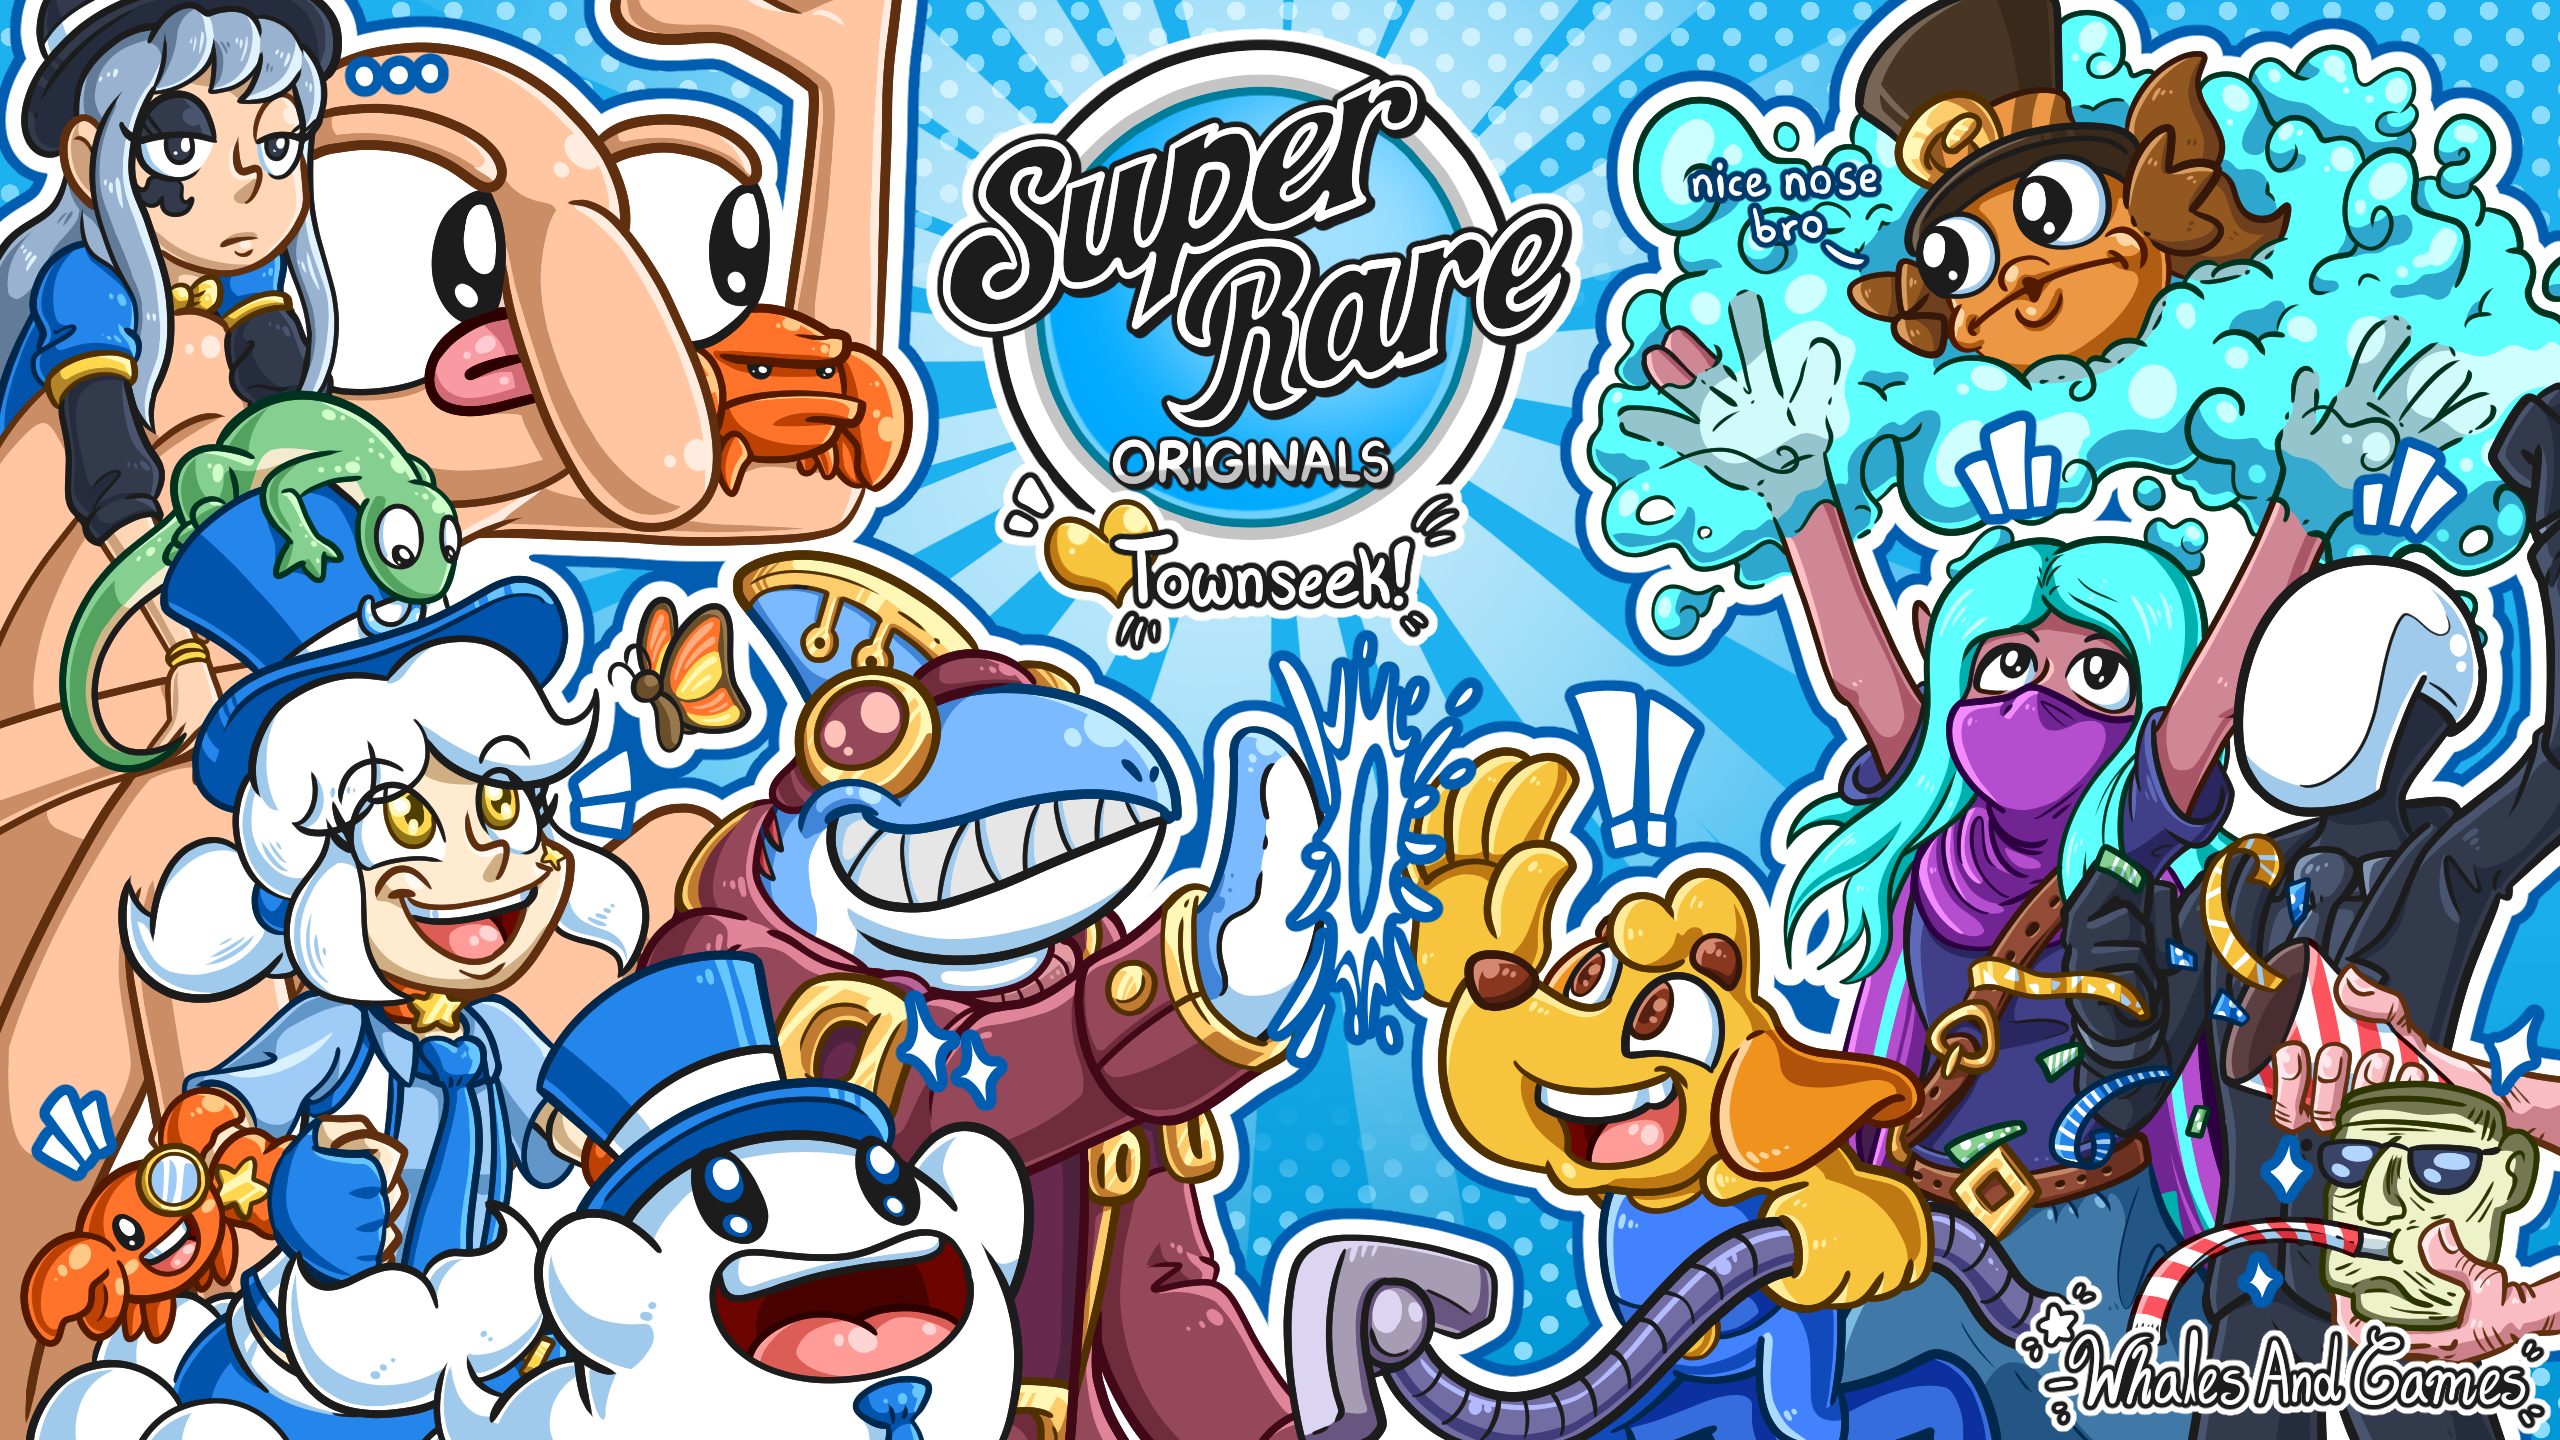 A piece of art by Whales And Games celebrating Townseek joining the Super Rare Originals roster. Captain Jawline is high-fiving Pablo the Dog from Grapple Dog and the two are surrounded by other characters of importance to Whales And Games and Super Rare Originals. From the SRO roster, the characters present are a resident of Grombi Isles from Completely Stretchy, the Gecko from The Gecko Gods, Elisabeth from LONE RUIN, OTXOMan from OTXO, and the health vial from POST VOID.